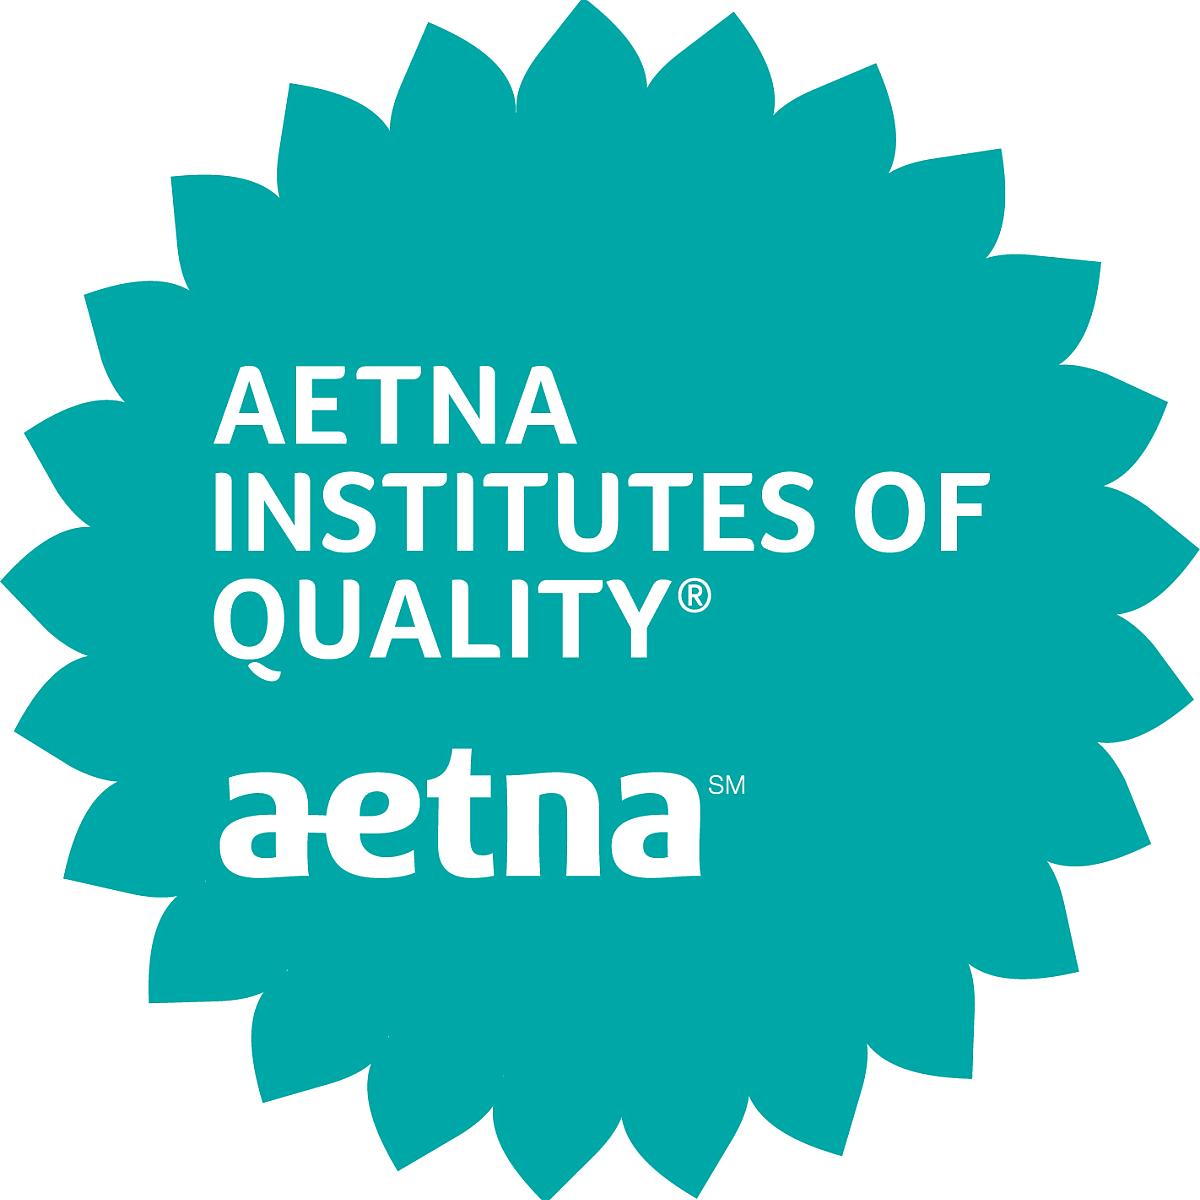 AETNA Institutes of Quality accreditation